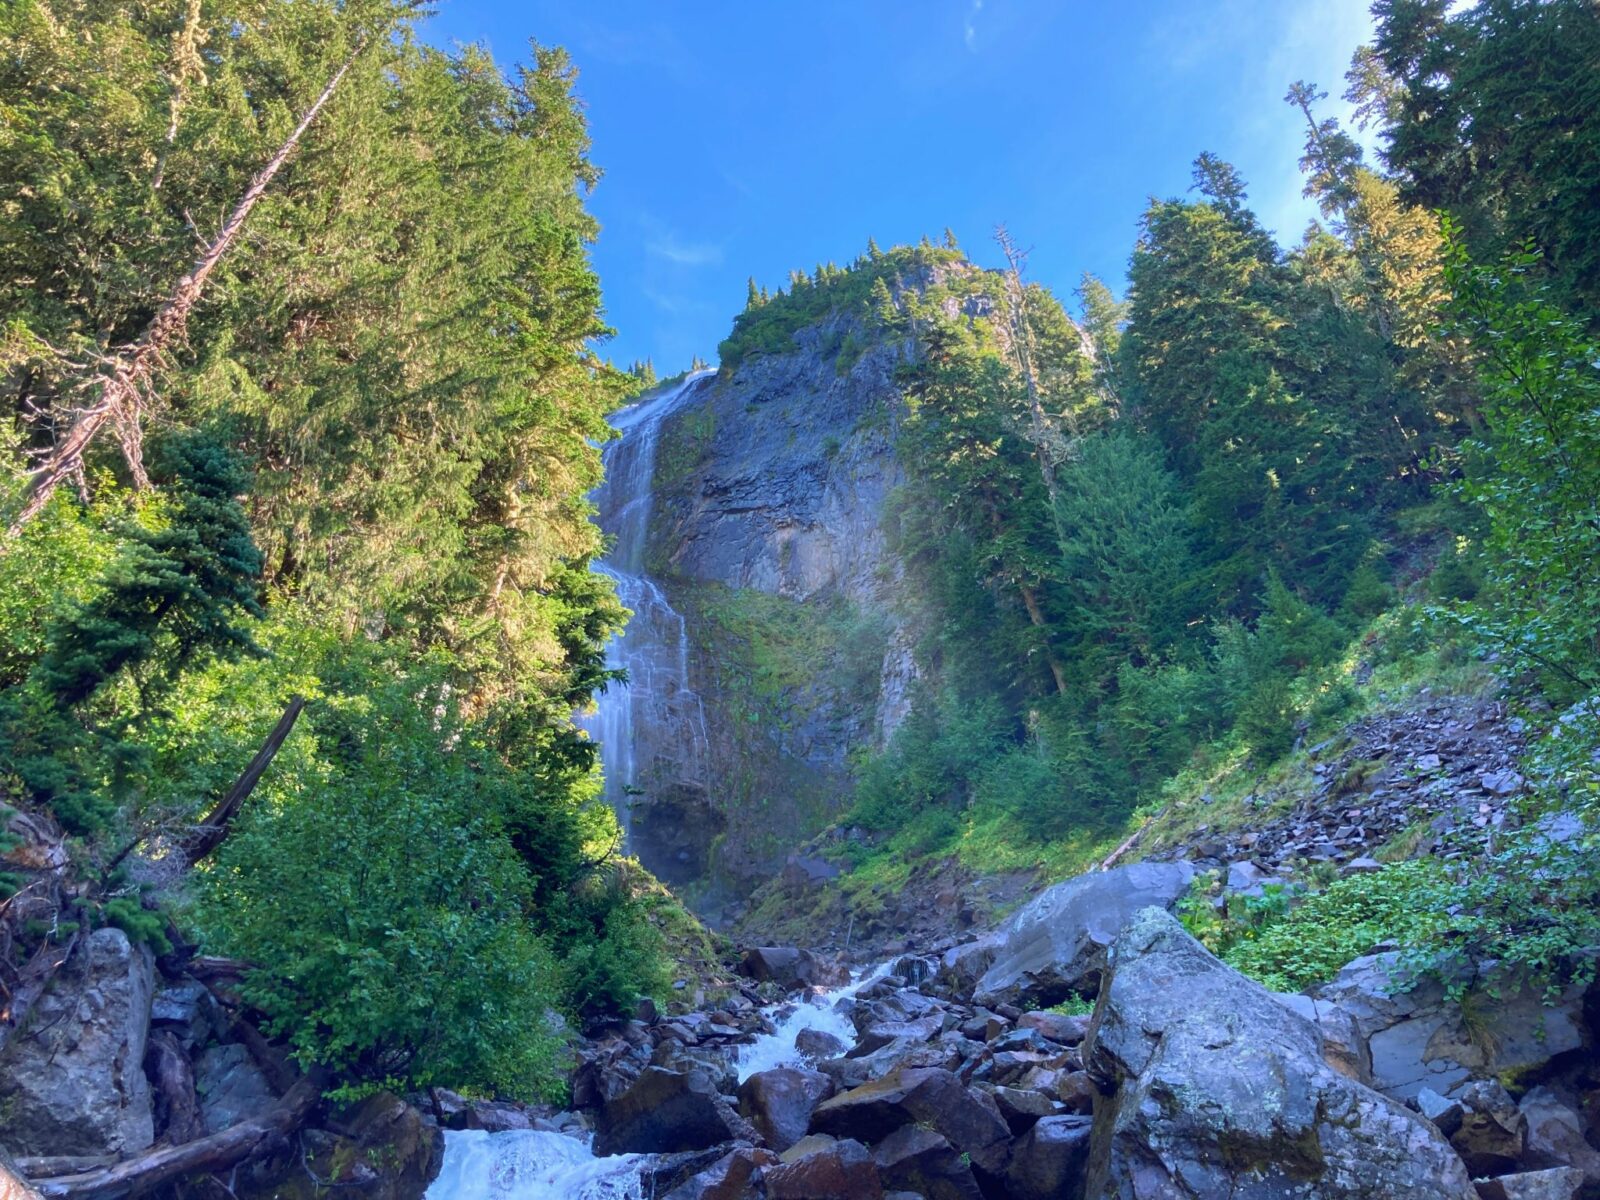 A steep and wide waterfall rolls over a cliff surrounded by forest. There are rocks and a creek in the foreground along the Spray Park trail in Mt Rainier National Park